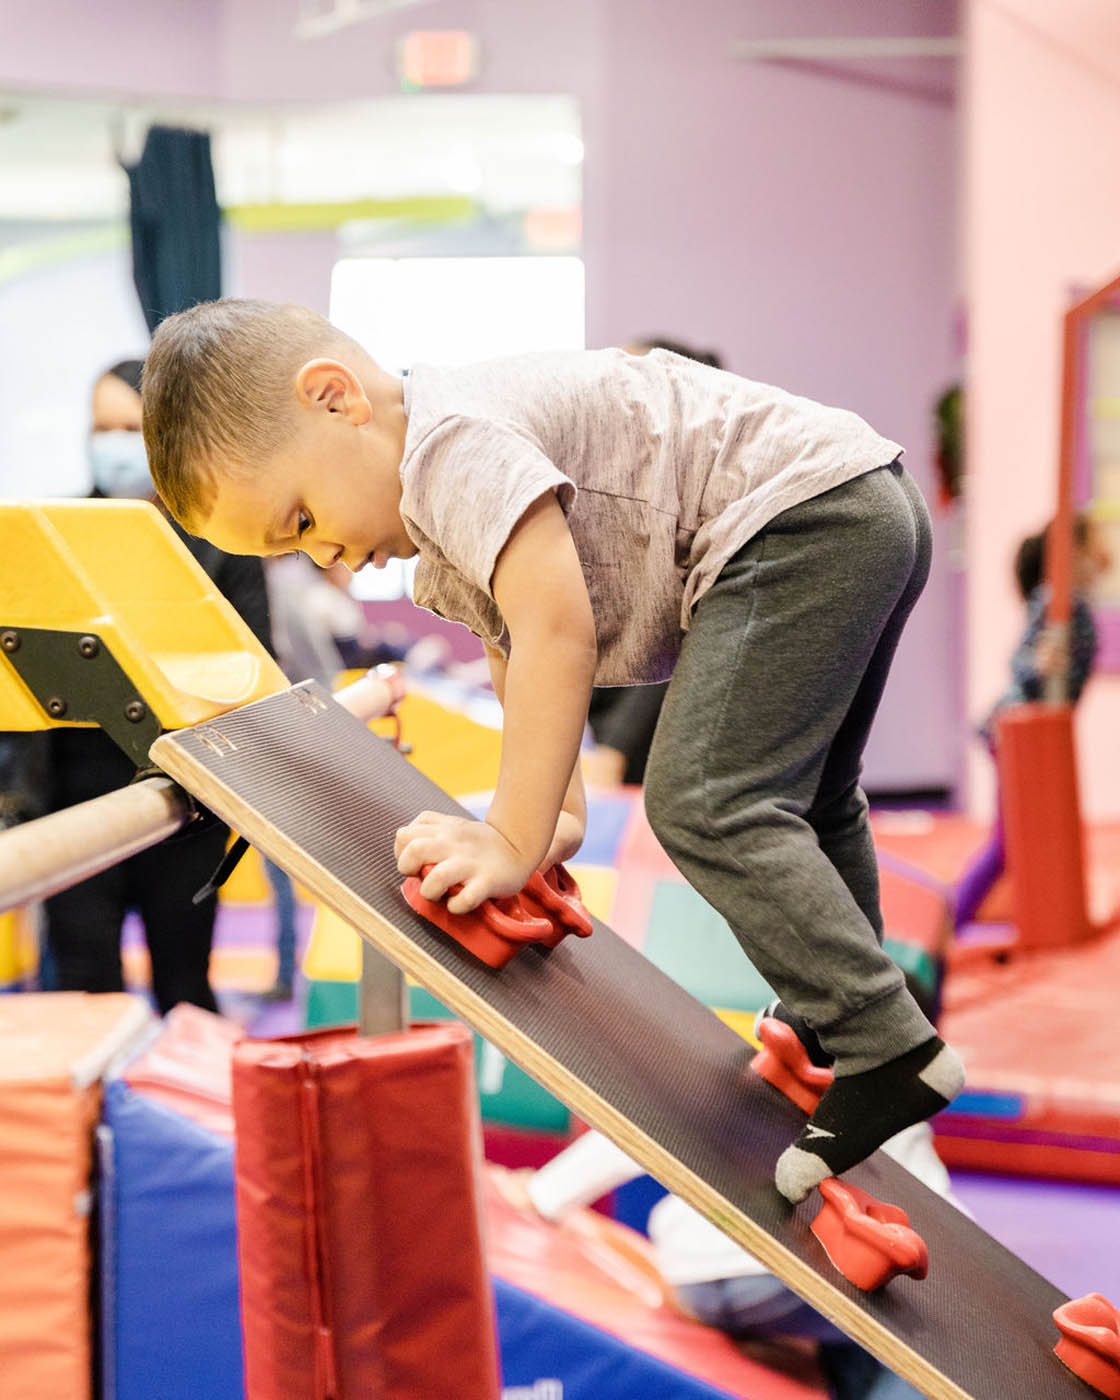 A young boy using a small climbing wall in Romp n' Roll's gym class in Pittsburgh.